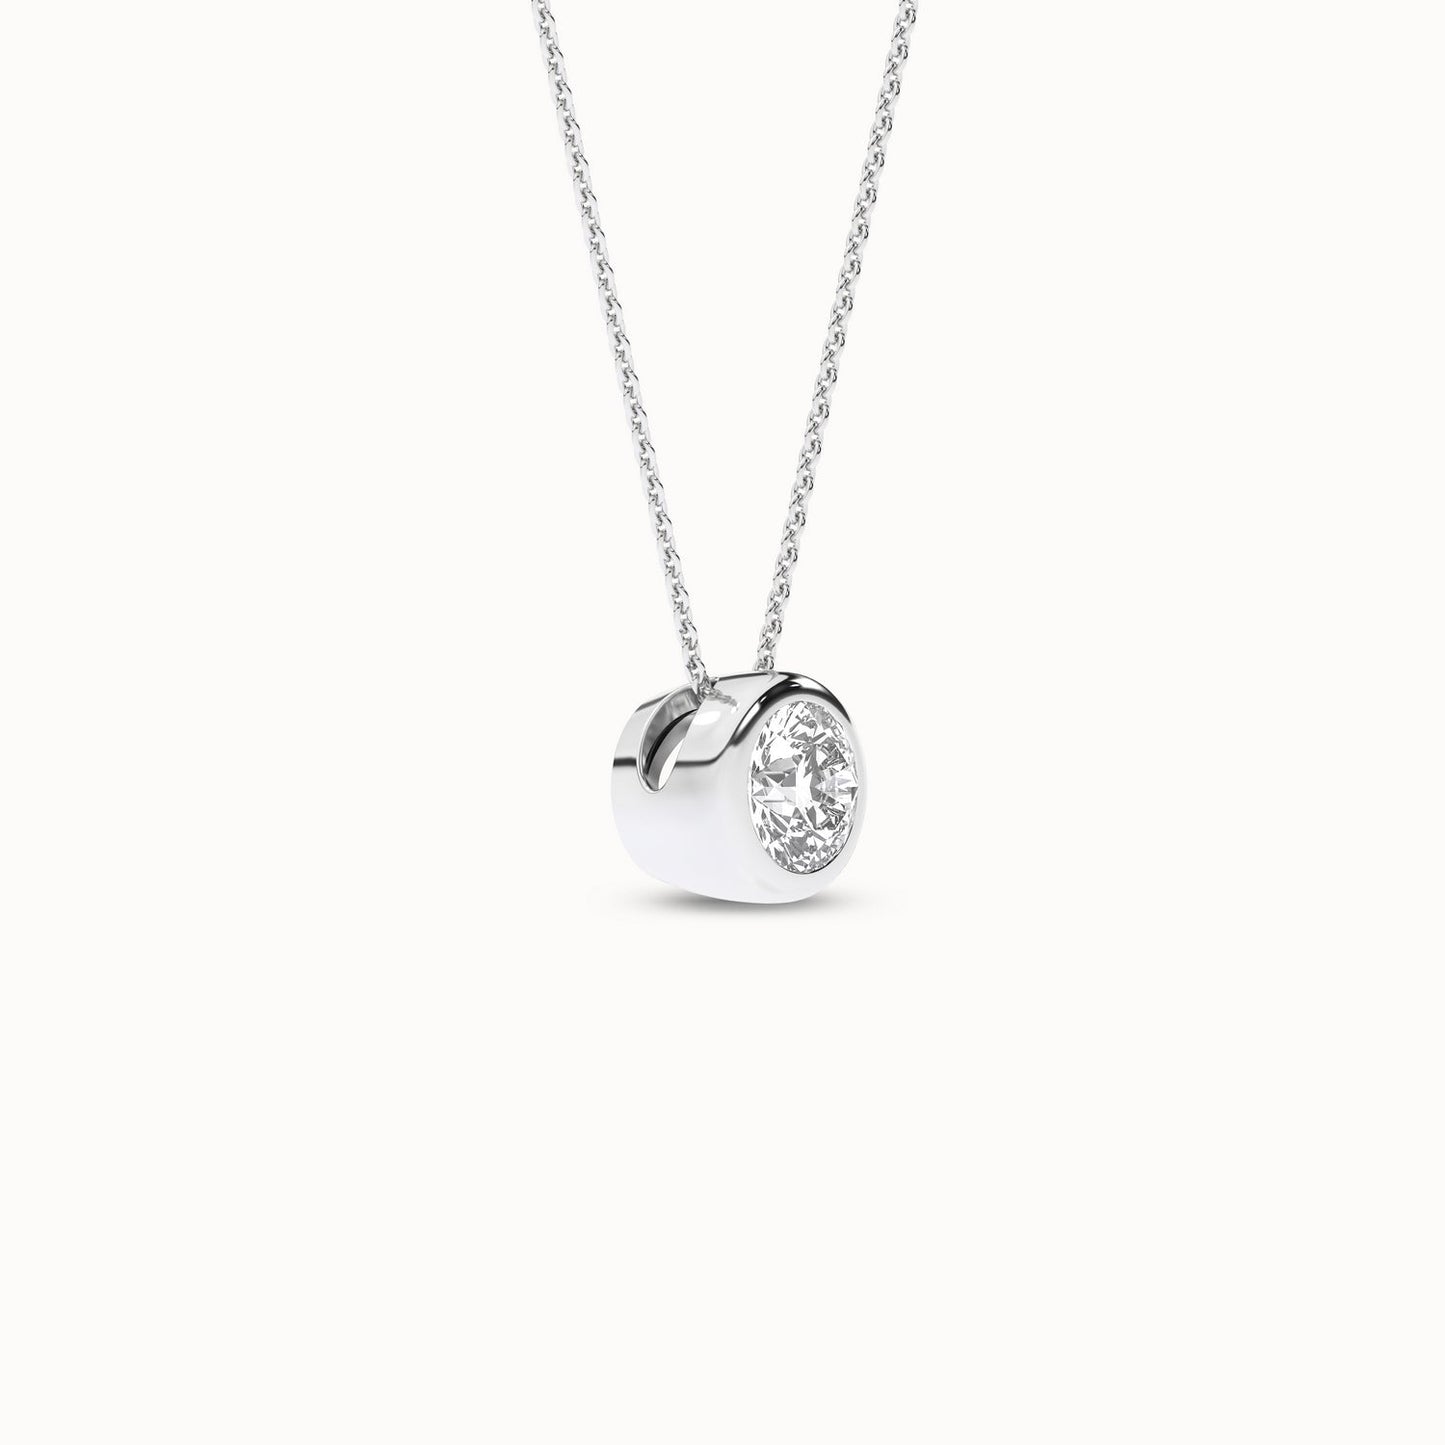 Encompassing Round Necklace_Product Angle_1/4Ct. - 2